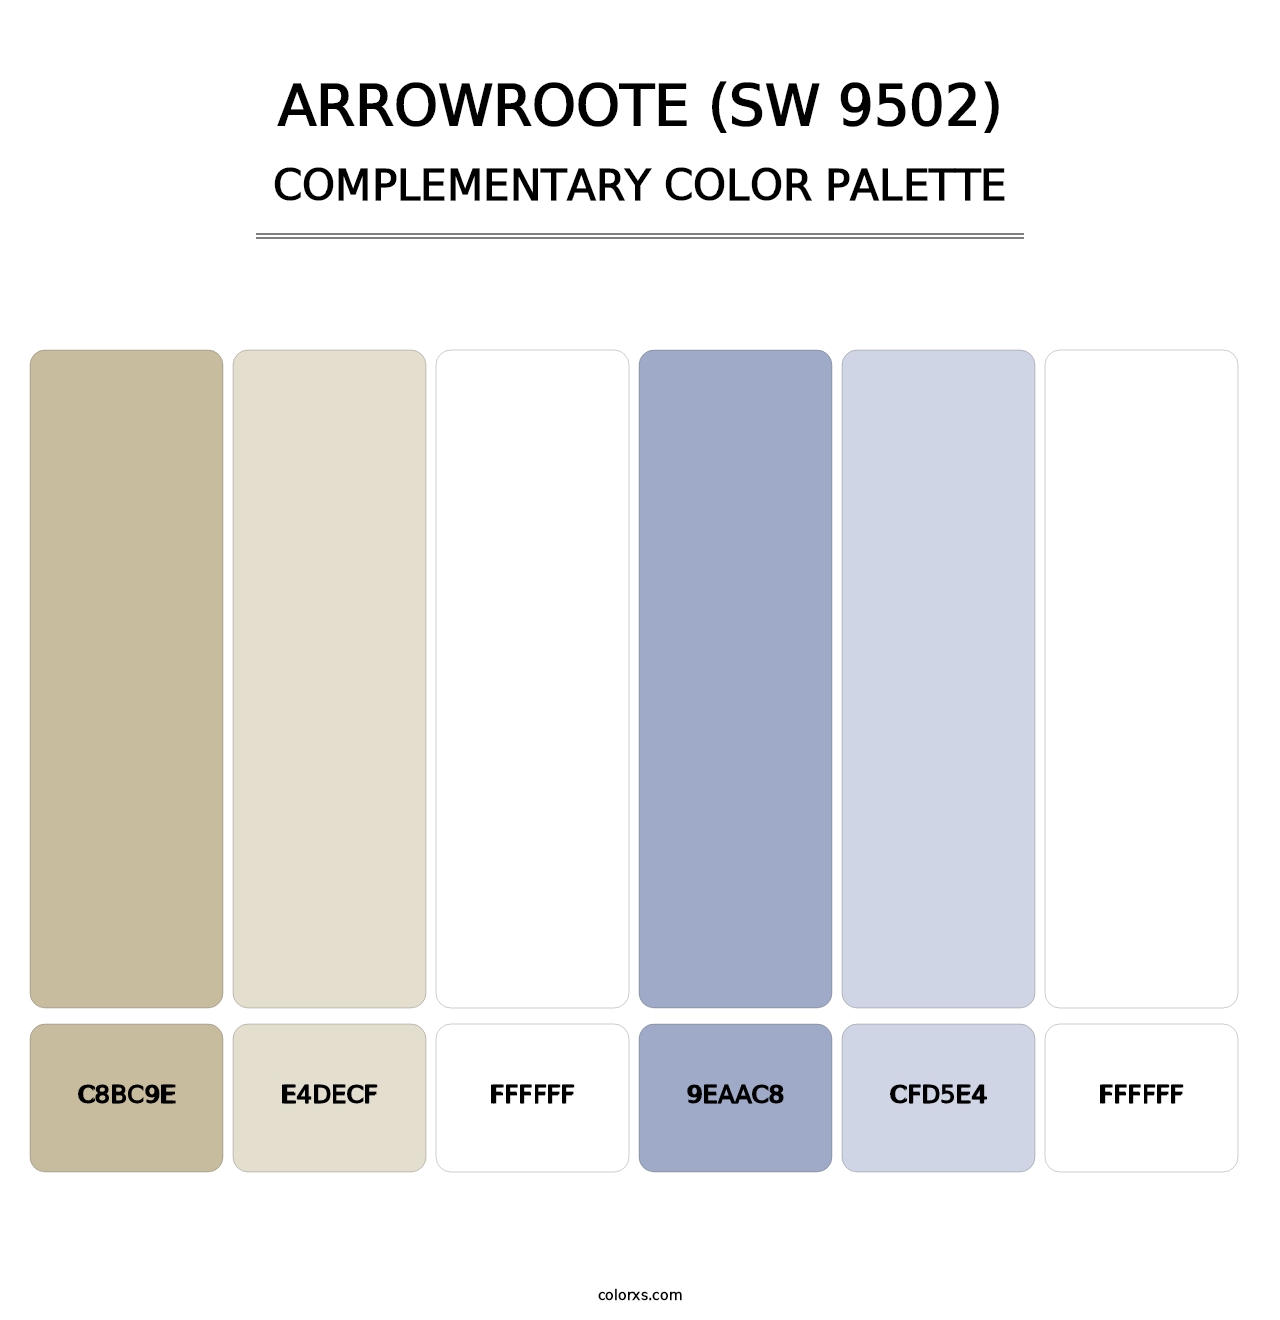 Arrowroote (SW 9502) - Complementary Color Palette